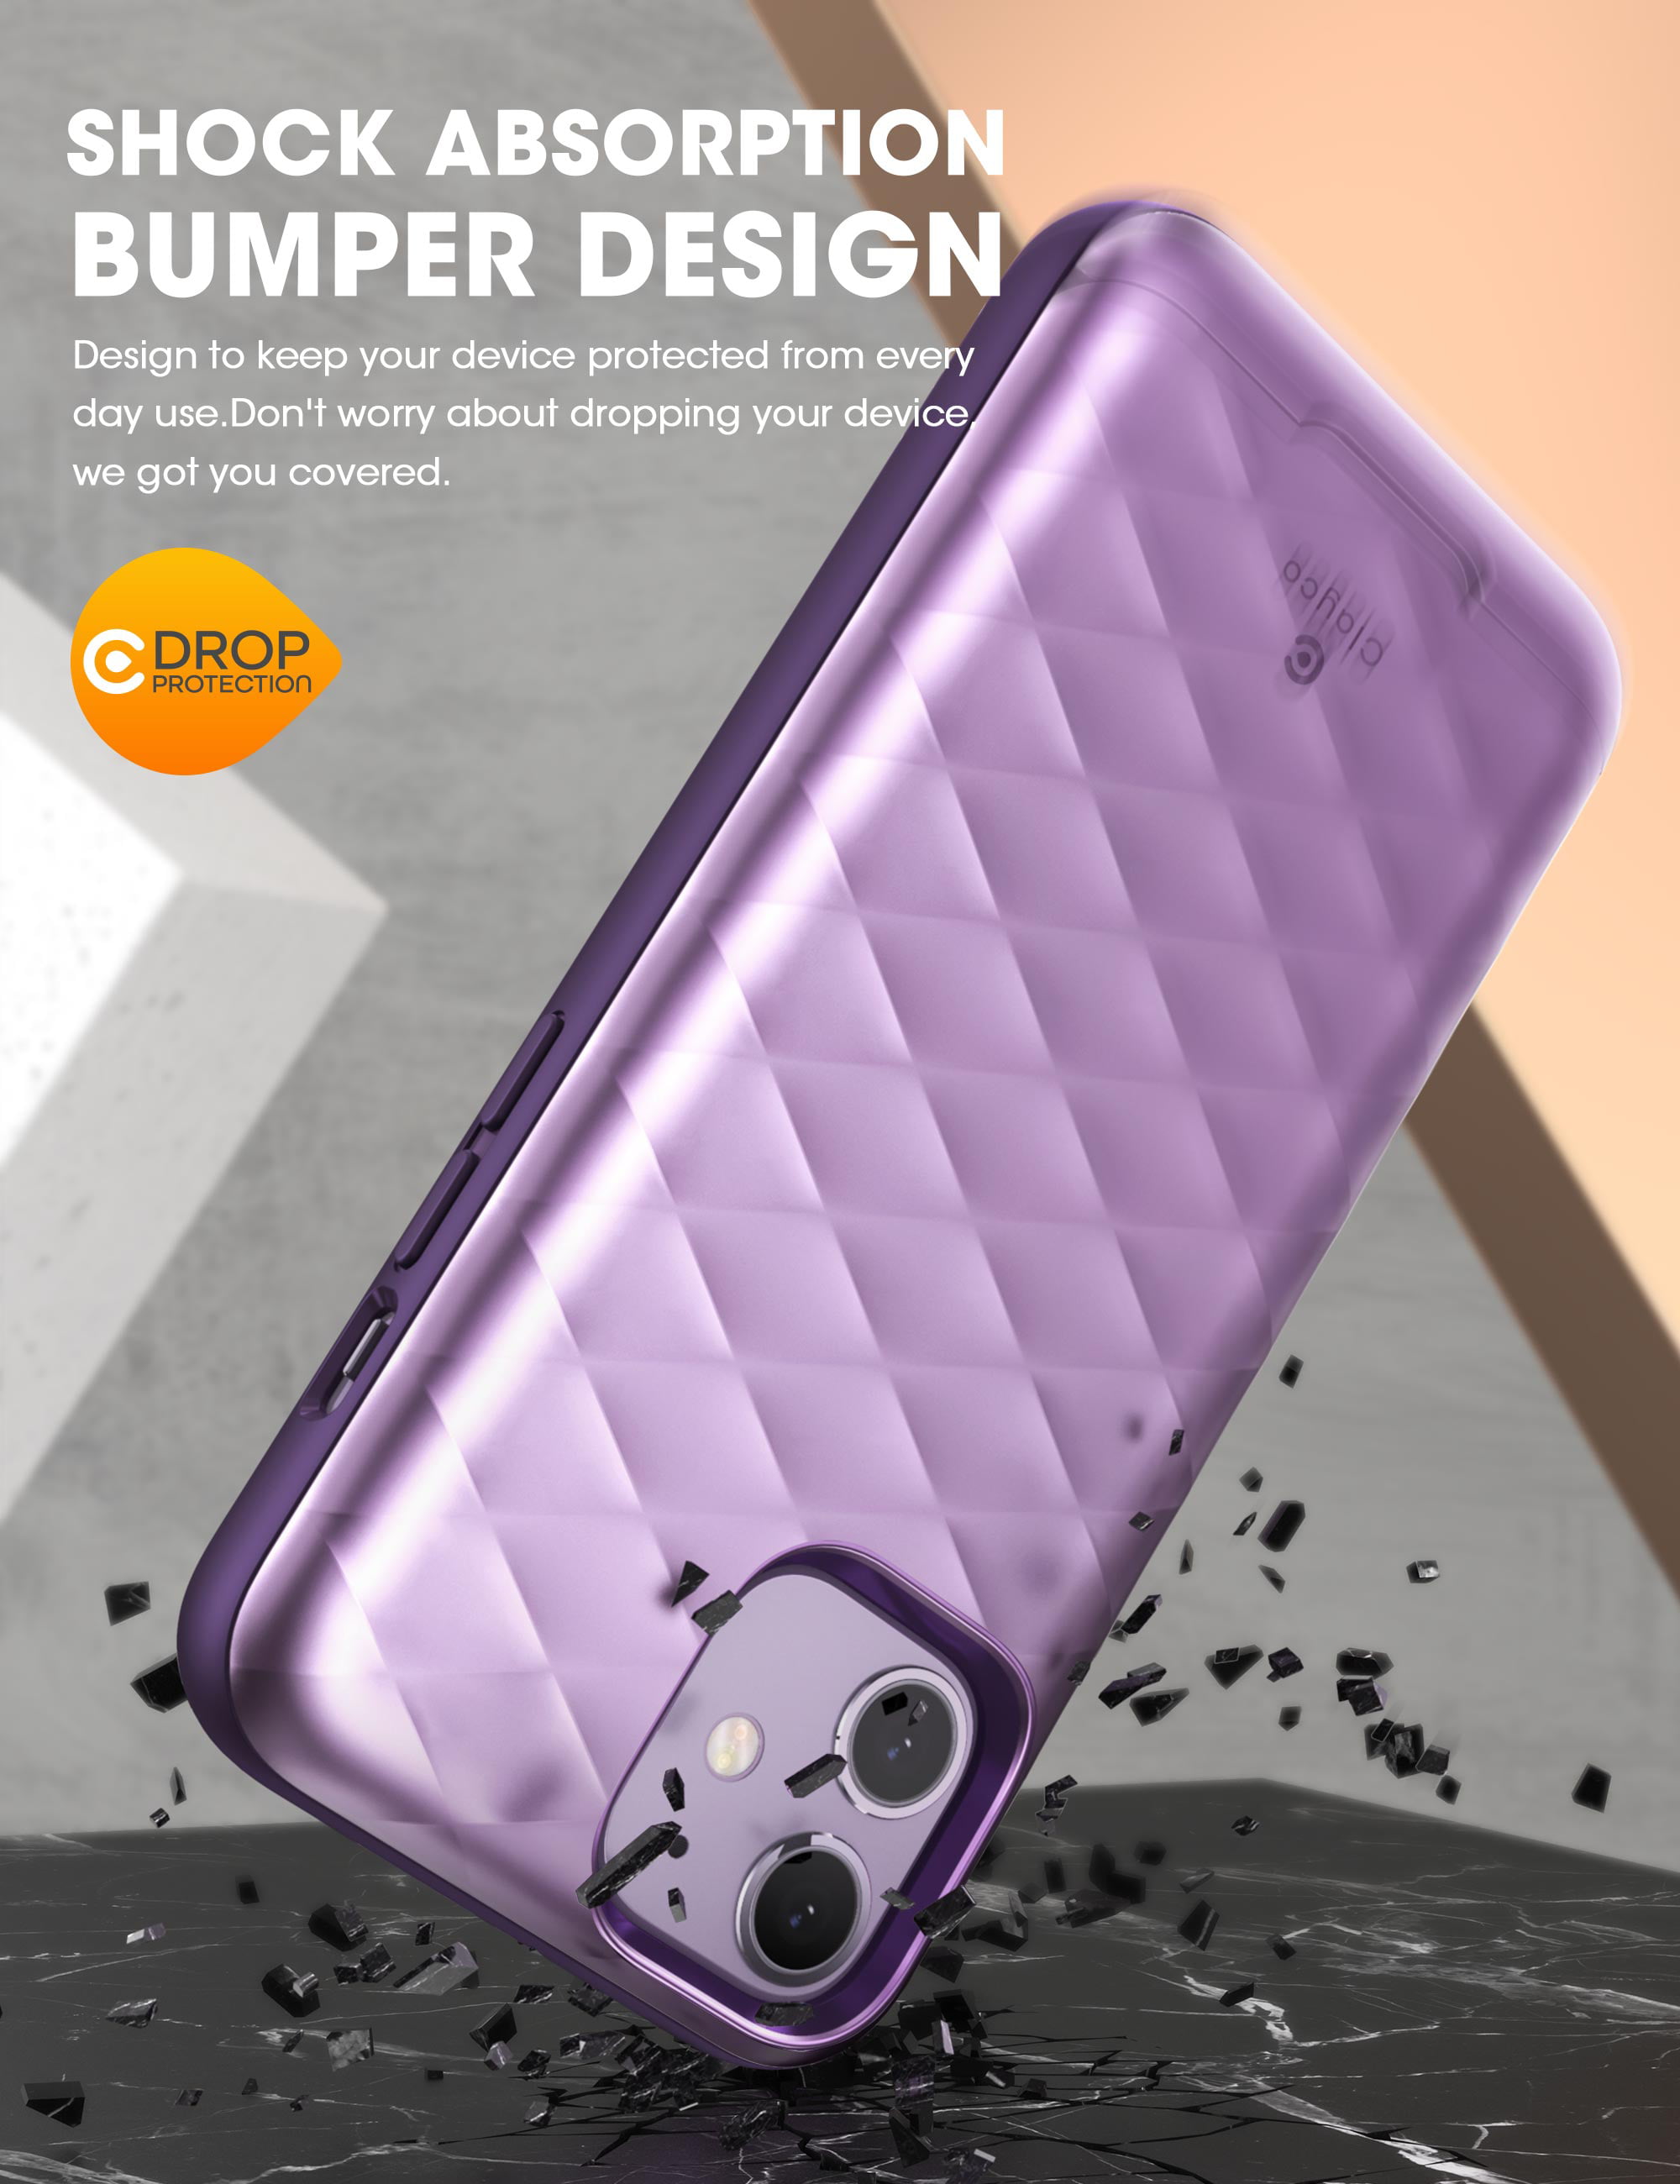 GOOSPERY iPhone 12 Mini Wallet Case with Card Holder, Protective Dual Layer Bumper Phone Case (Lilac Purple) Ip12m-mdb-ppl